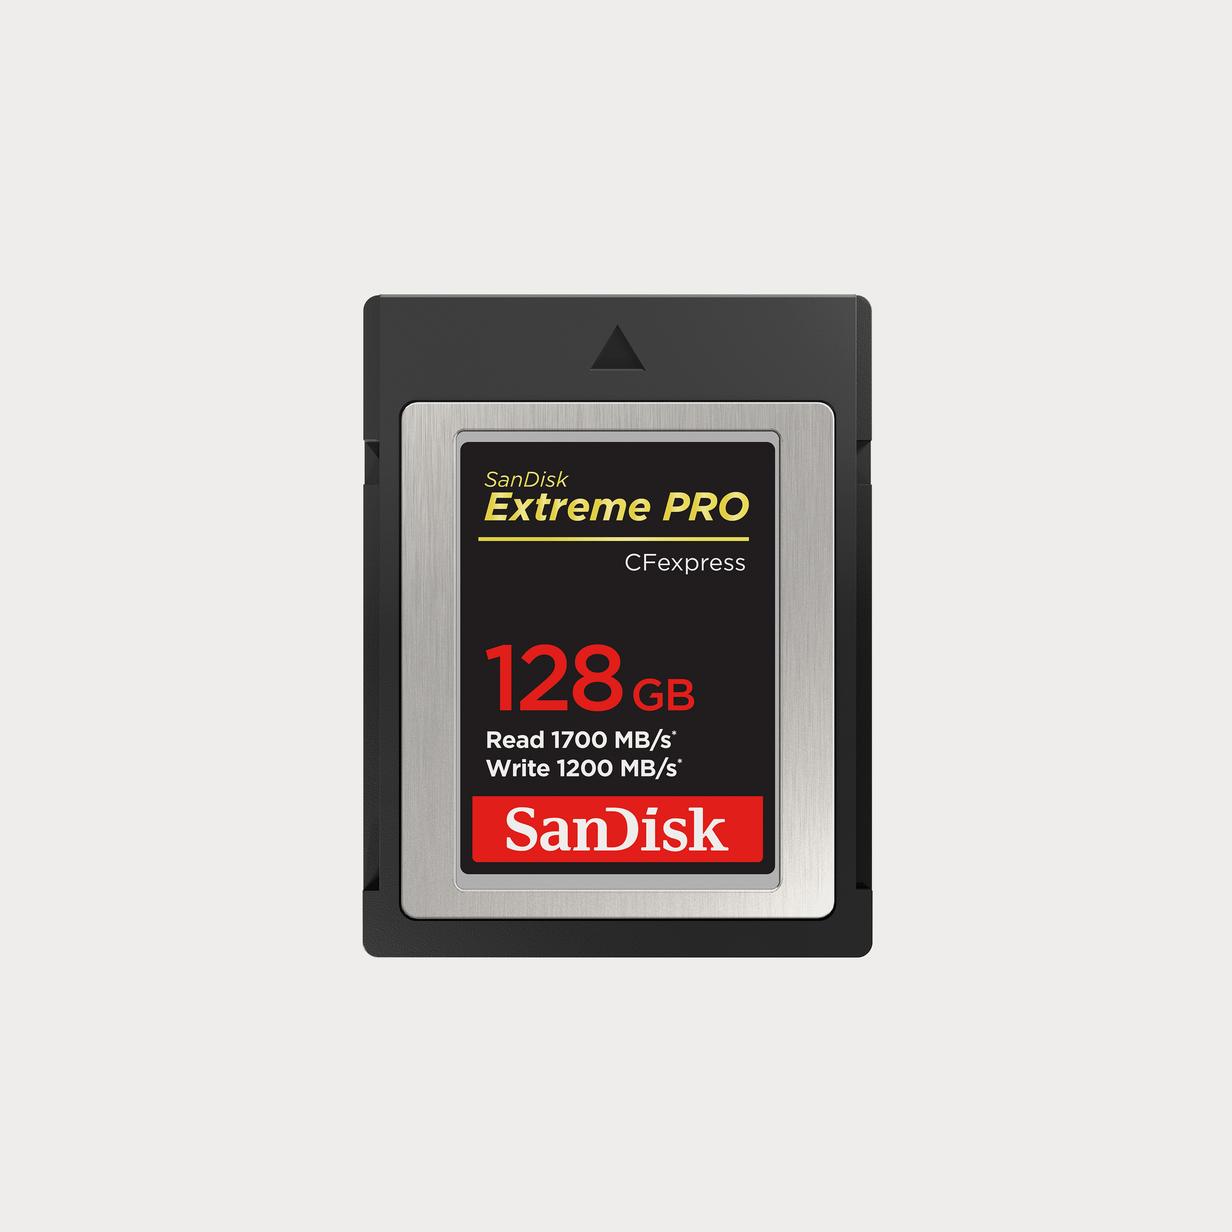 Moment sandisk SDCFE SDCFE 128 G ANCNN Extreme Pro C Fexpress Card 128 GB 01